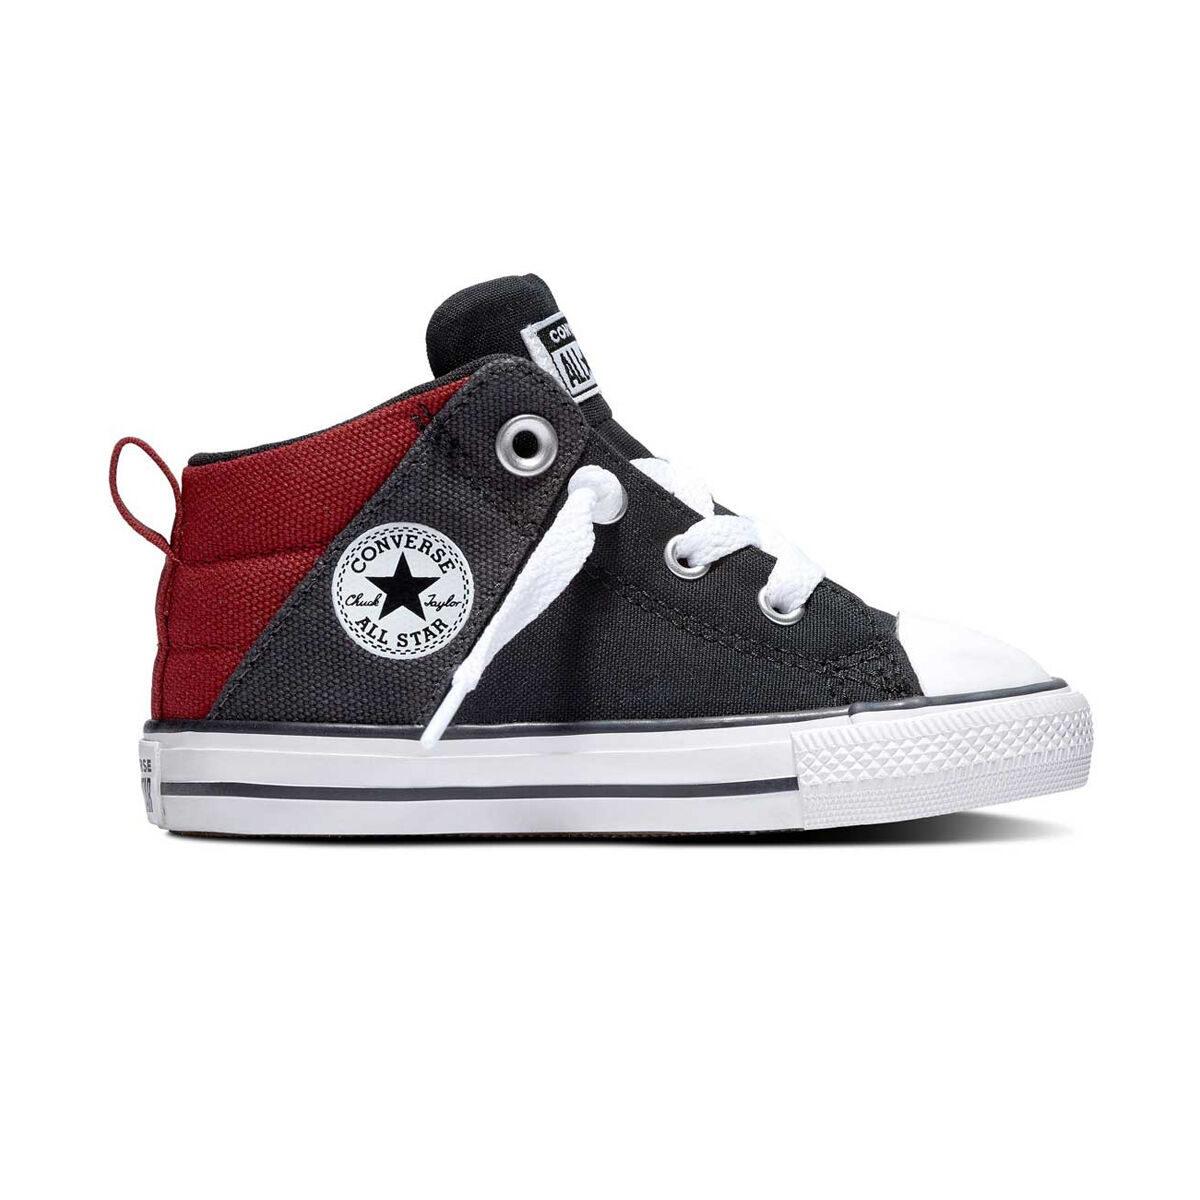 Star Street Toddlers Casual Shoes 